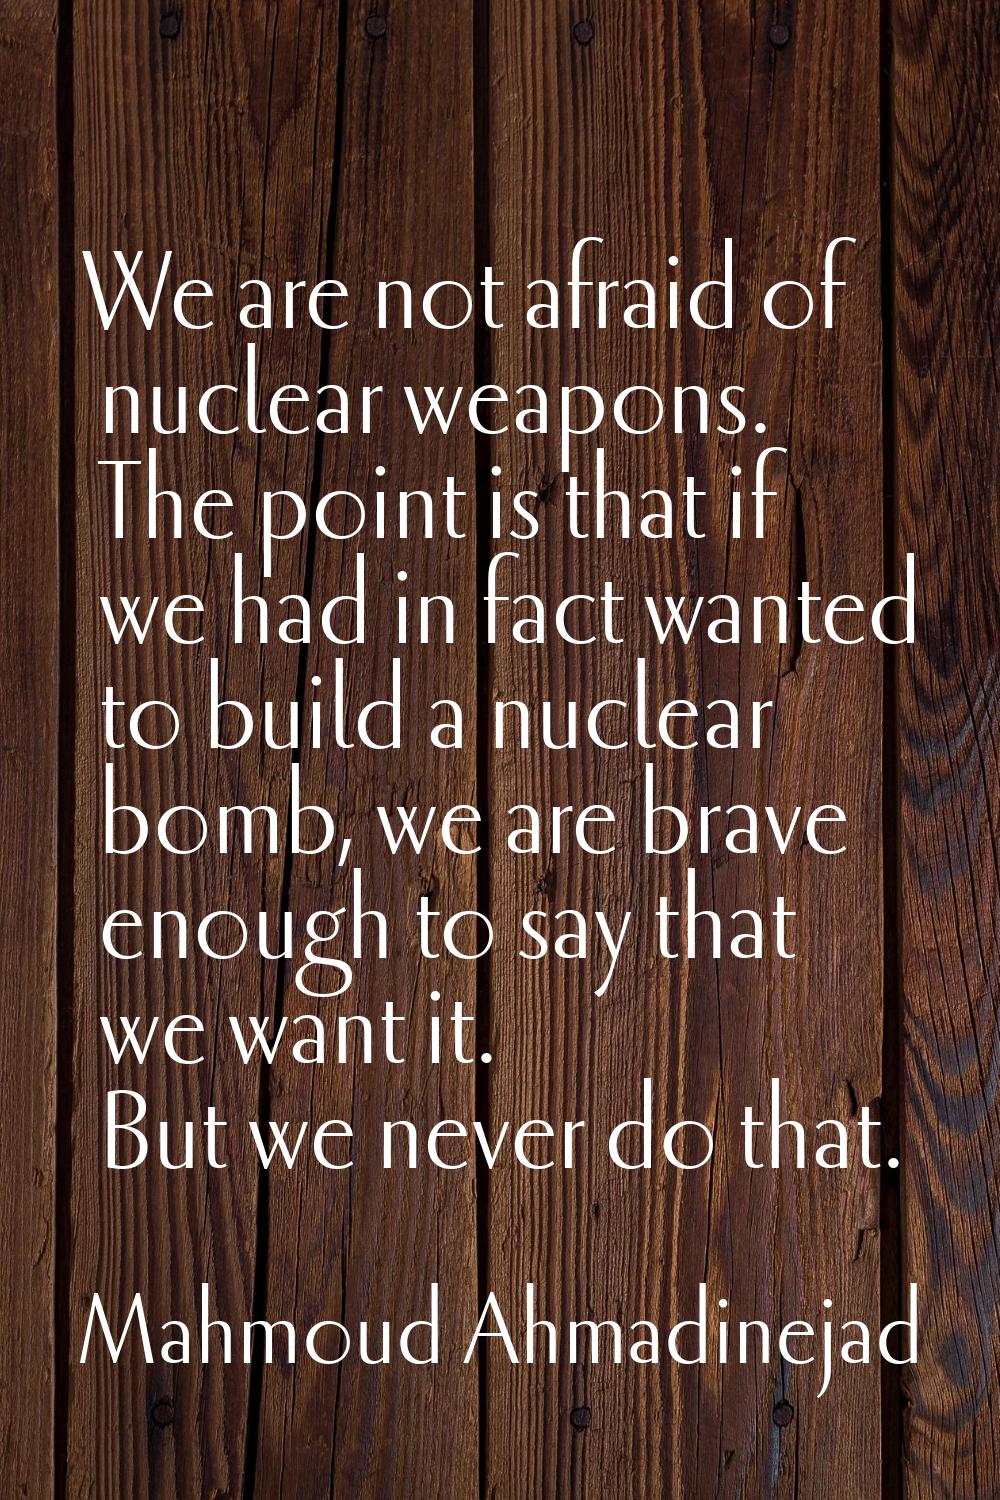 We are not afraid of nuclear weapons. The point is that if we had in fact wanted to build a nuclear